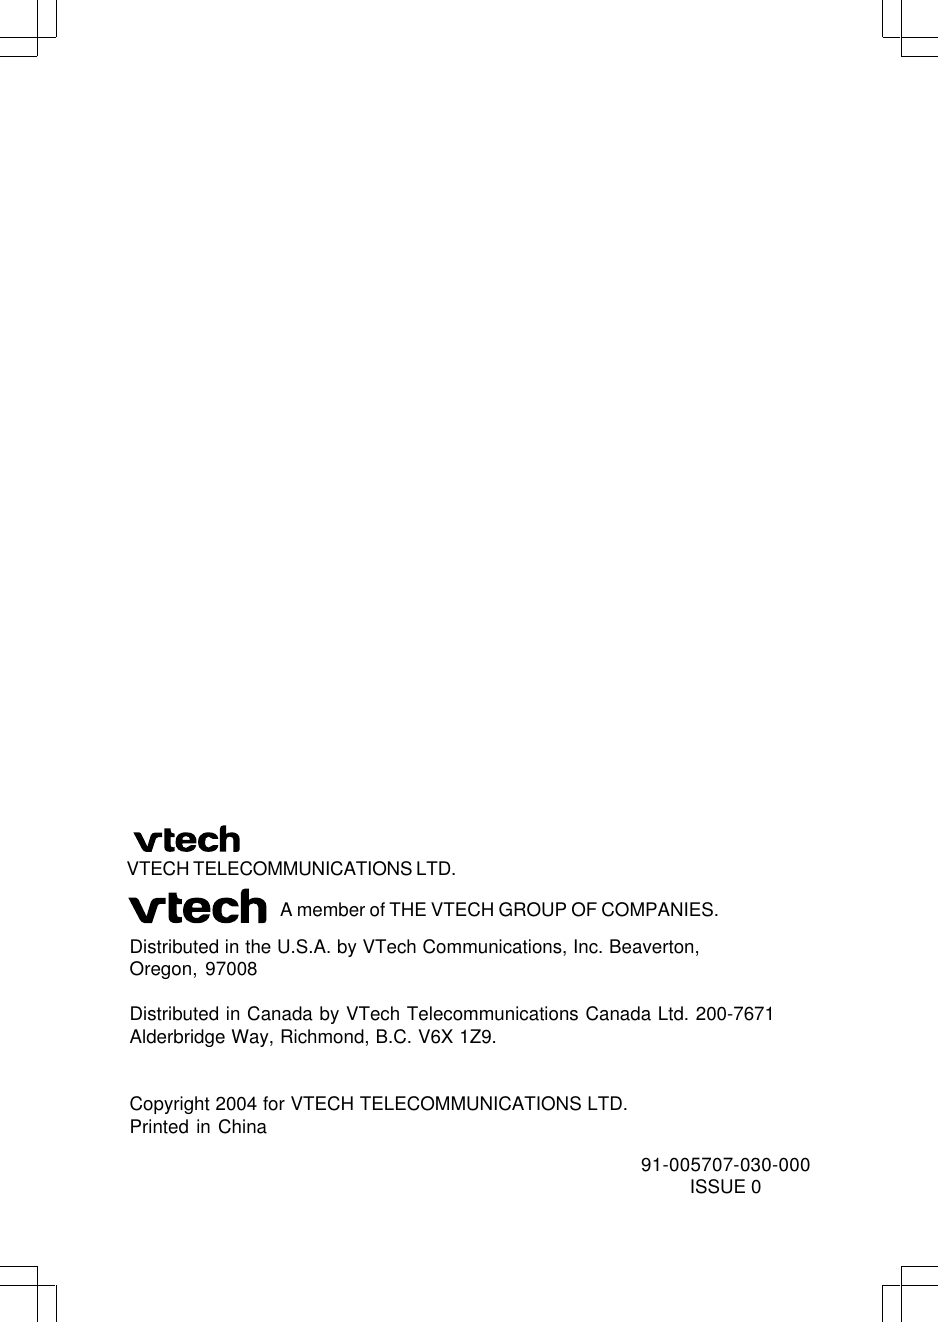 Distributed in the U.S.A. by VTech Communications, Inc. Beaverton,Oregon, 97008Distributed in Canada by VTech Telecommunications Canada Ltd. 200-7671Alderbridge Way, Richmond, B.C. V6X 1Z9.Copyright 2004 for VTECH TELECOMMUNICATIONS LTD.Printed in ChinaVTECH TELECOMMUNICATIONS LTD.A member of THE VTECH GROUP OF COMPANIES.91-005707-030-000ISSUE 0